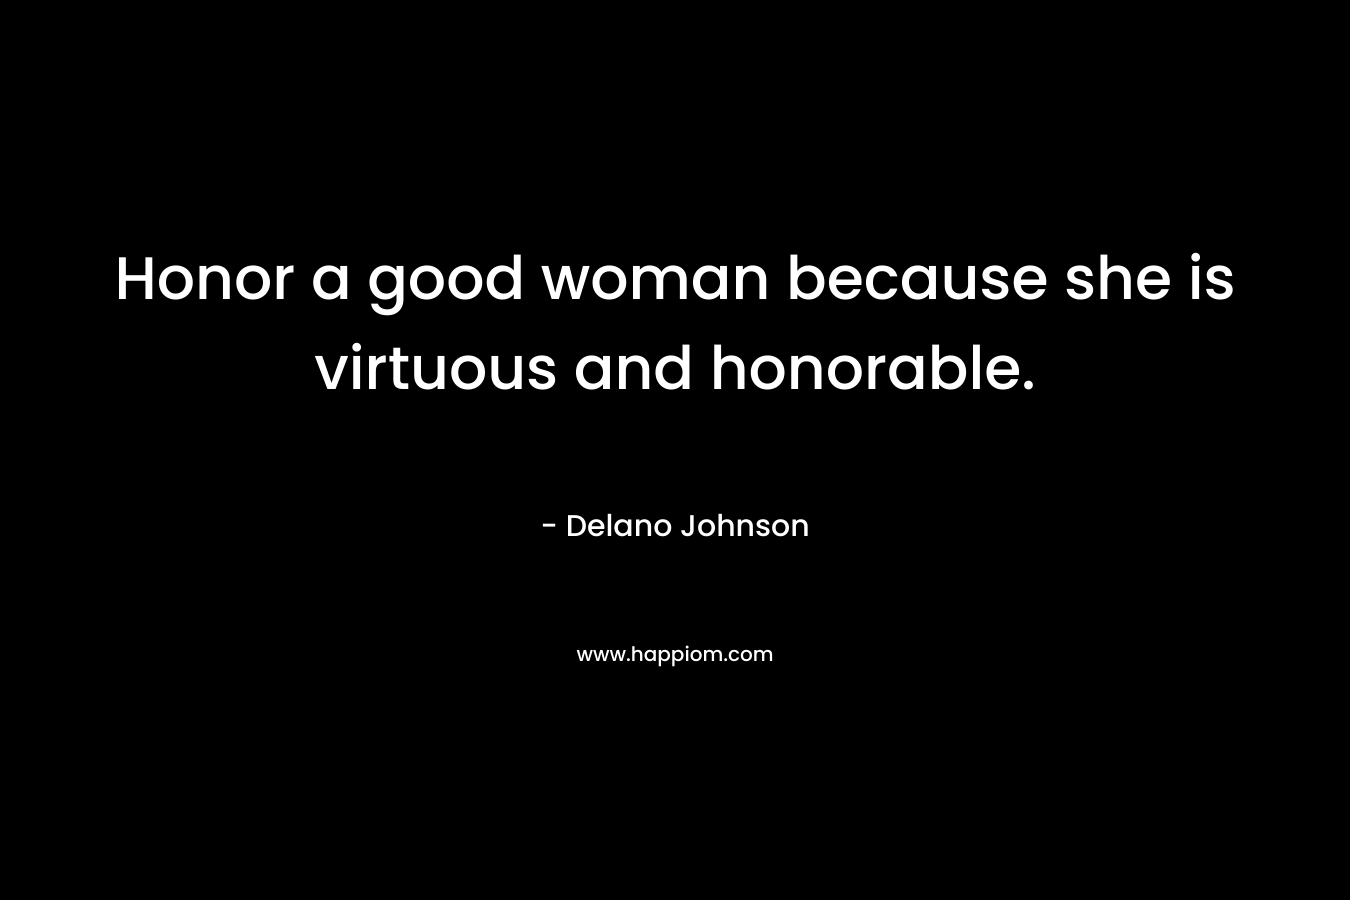 Honor a good woman because she is virtuous and honorable.